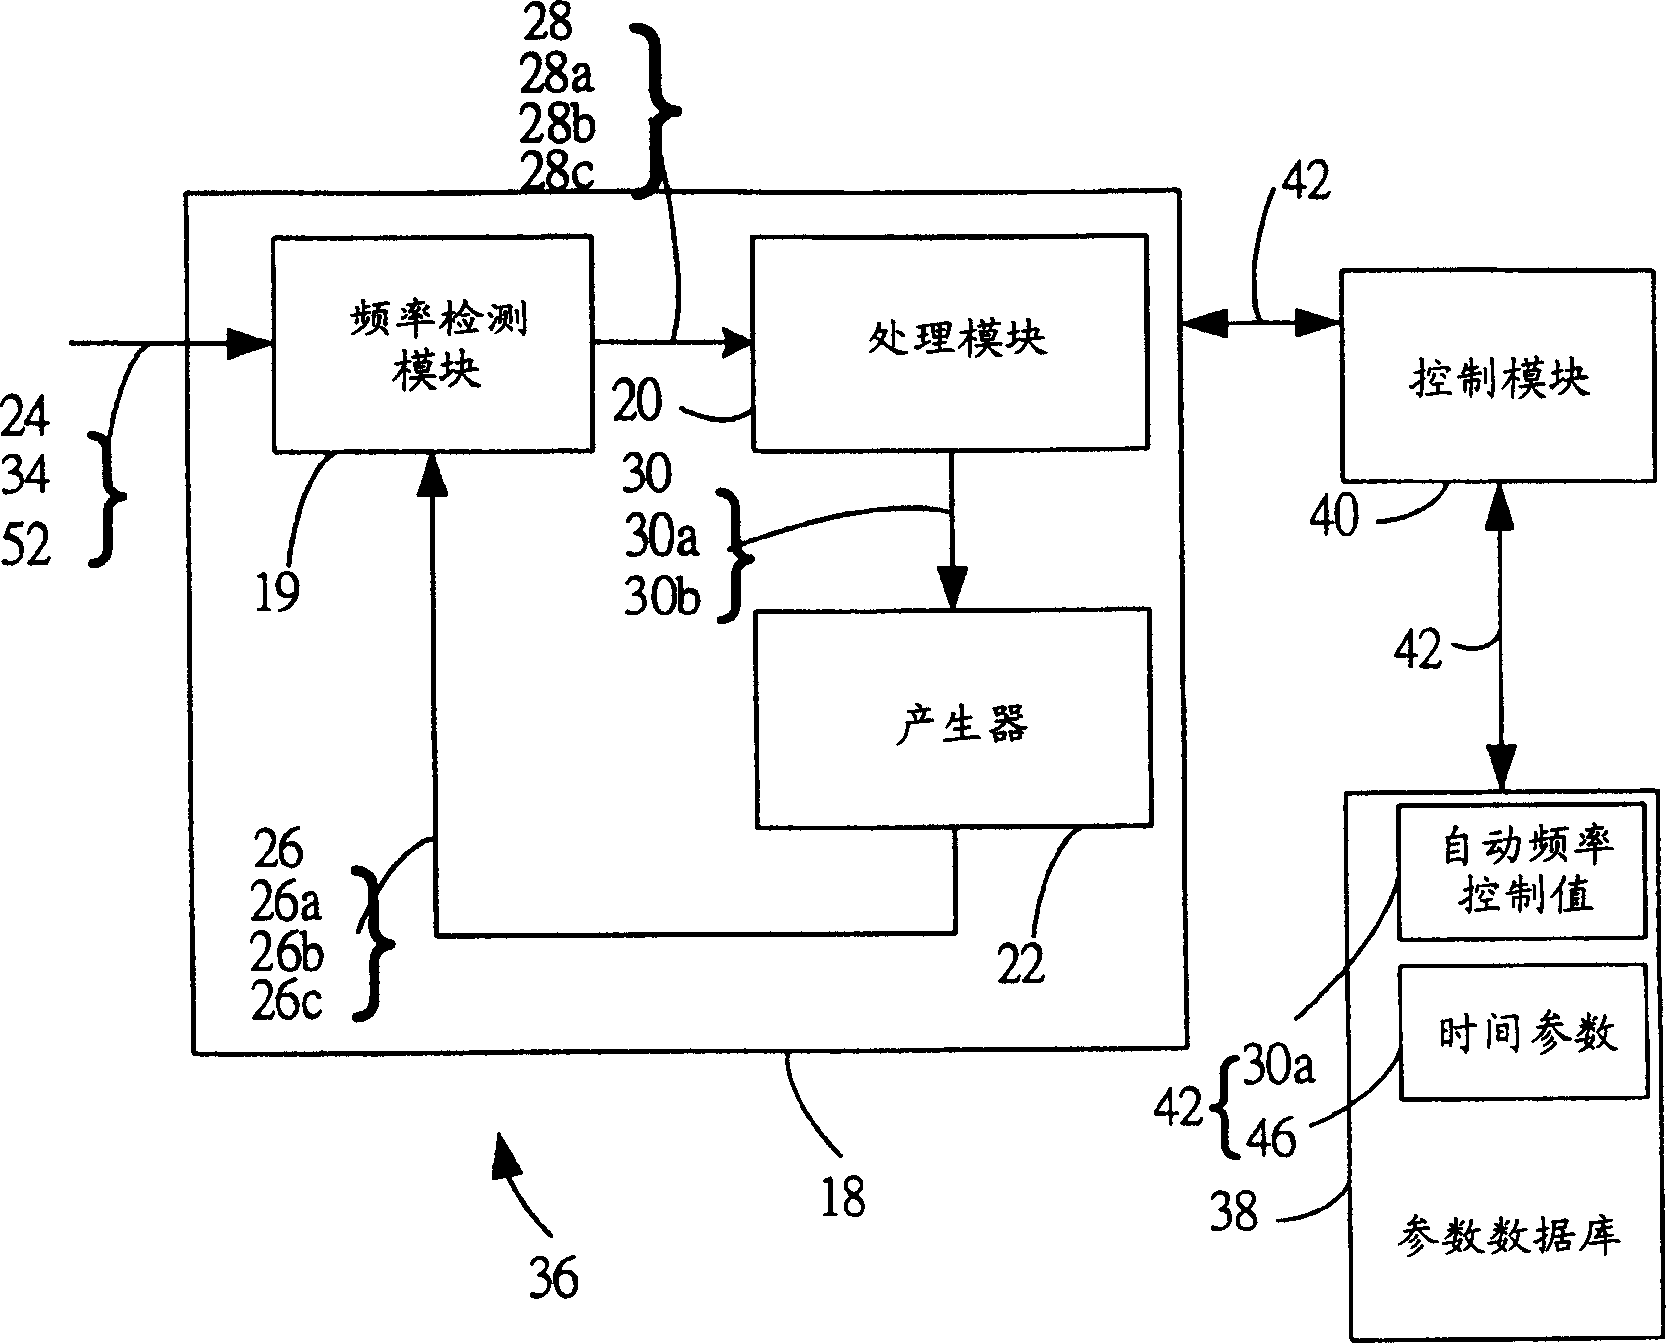 Automatic frequency control system corresponding to multiple base stations in wireless communication system